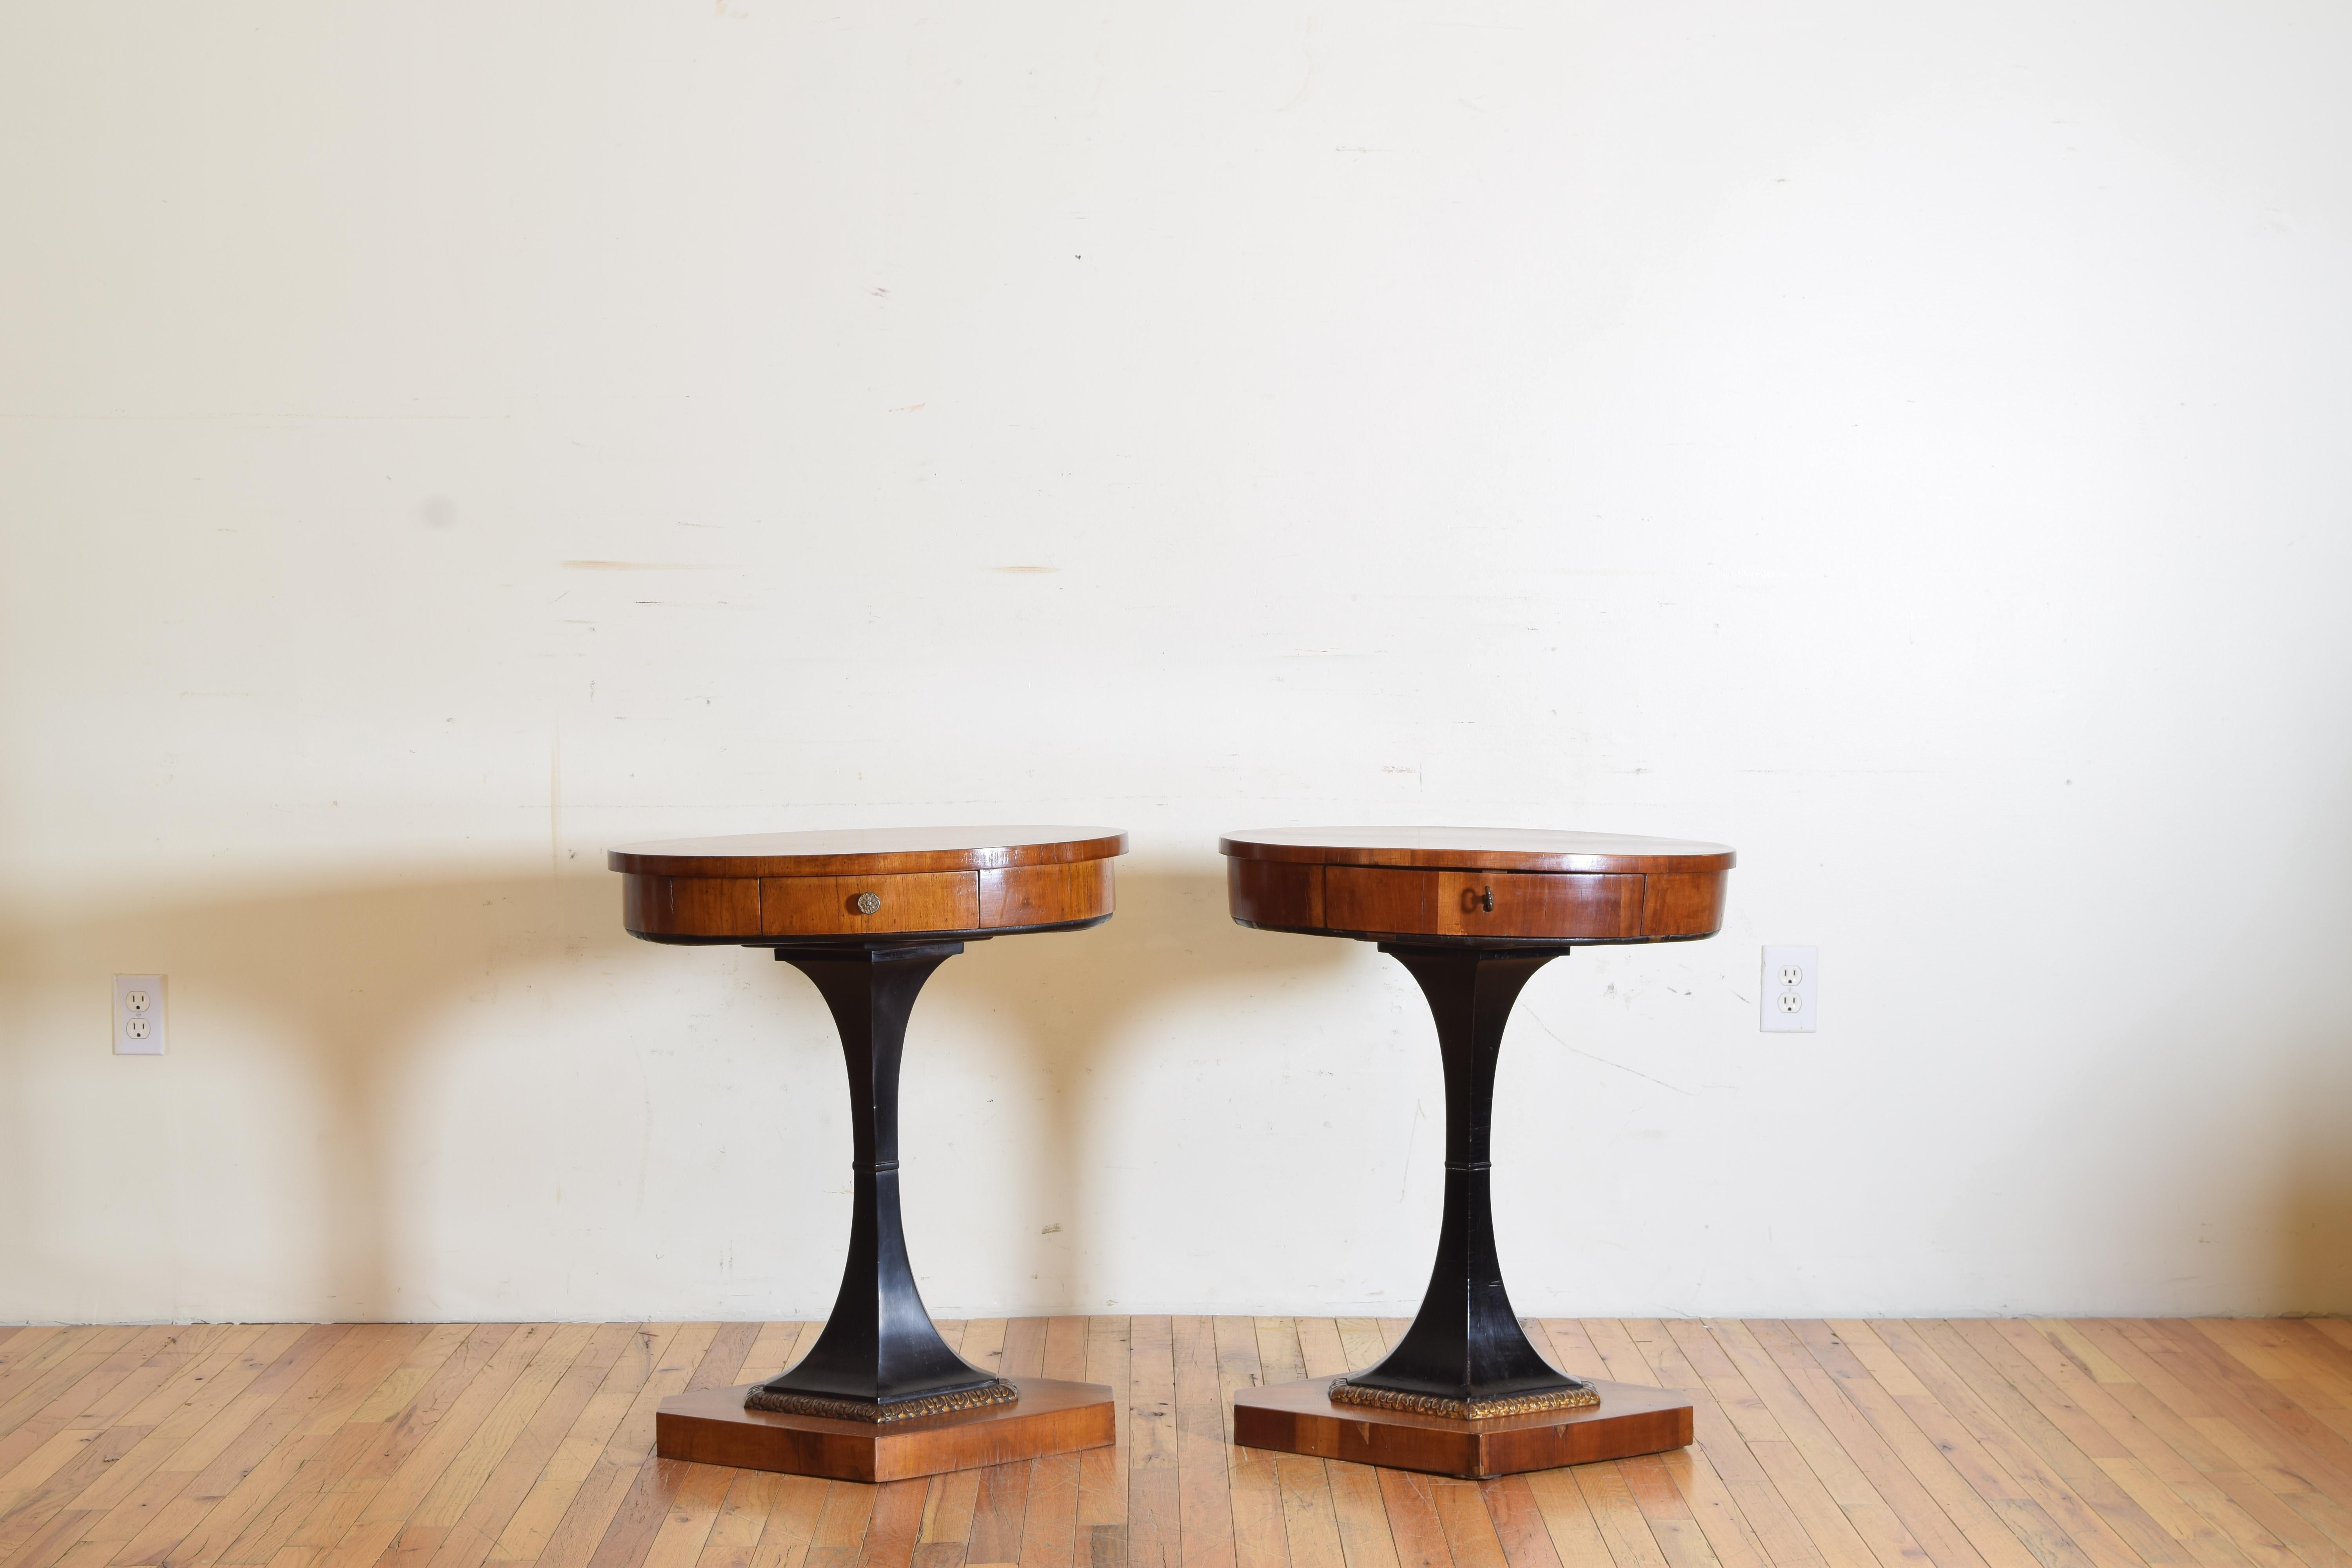 a NEAR pair, each of oval form and having one drawer with a brass pull, raised on shaped ebonized bases with carved gilt trim atop lozenge form bases, one of the tables from the early 19th century made of walnut, the newer table from the early 20th